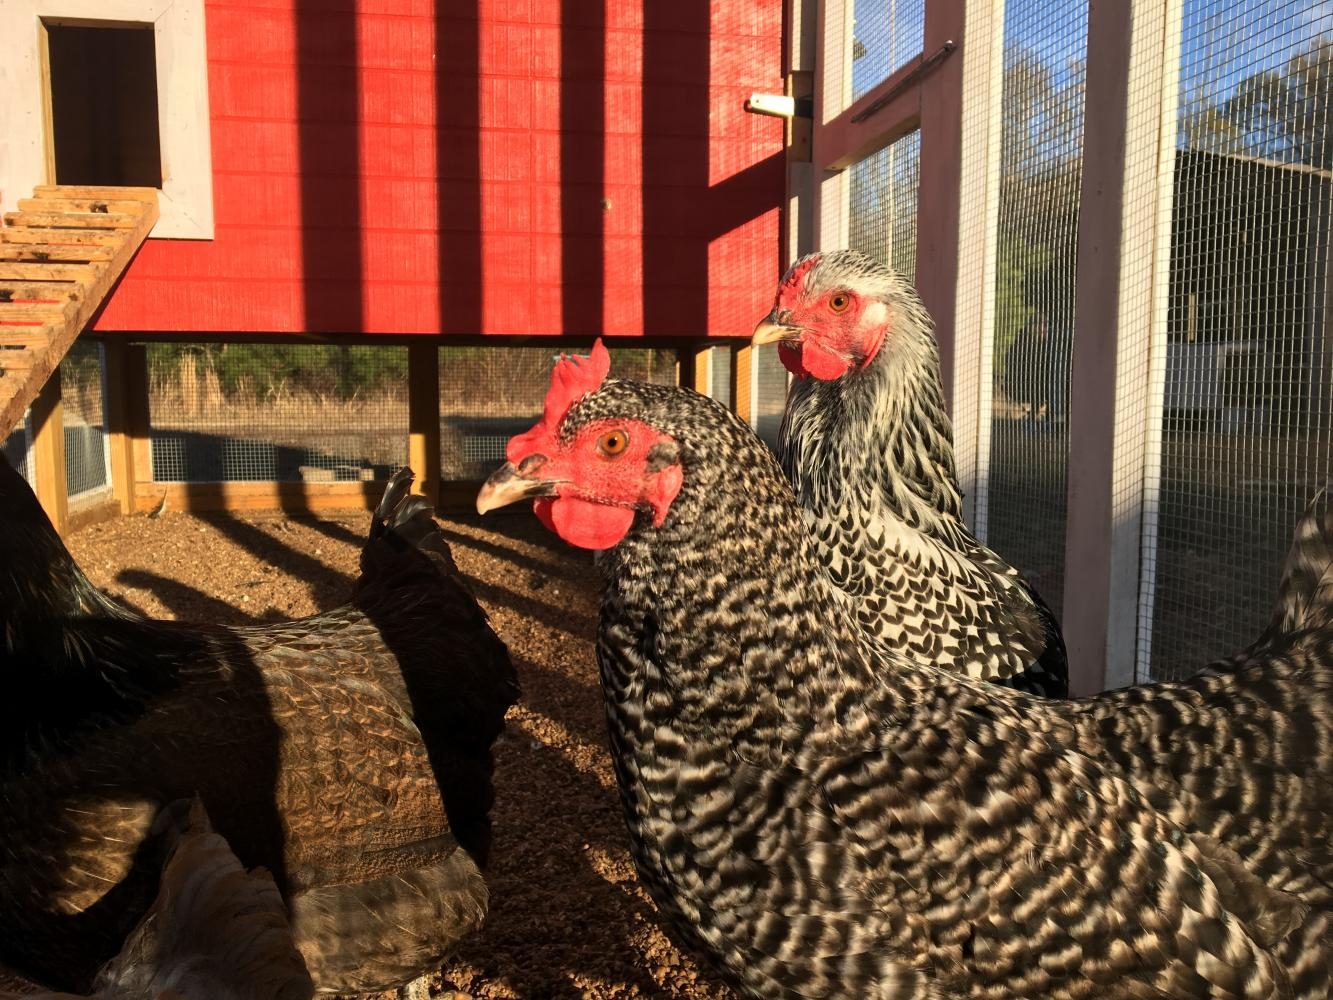 Chickens sit in the chicken coop built by Shane Horton. Students came face-to-face with the real-world challenges of running a small scale farm.